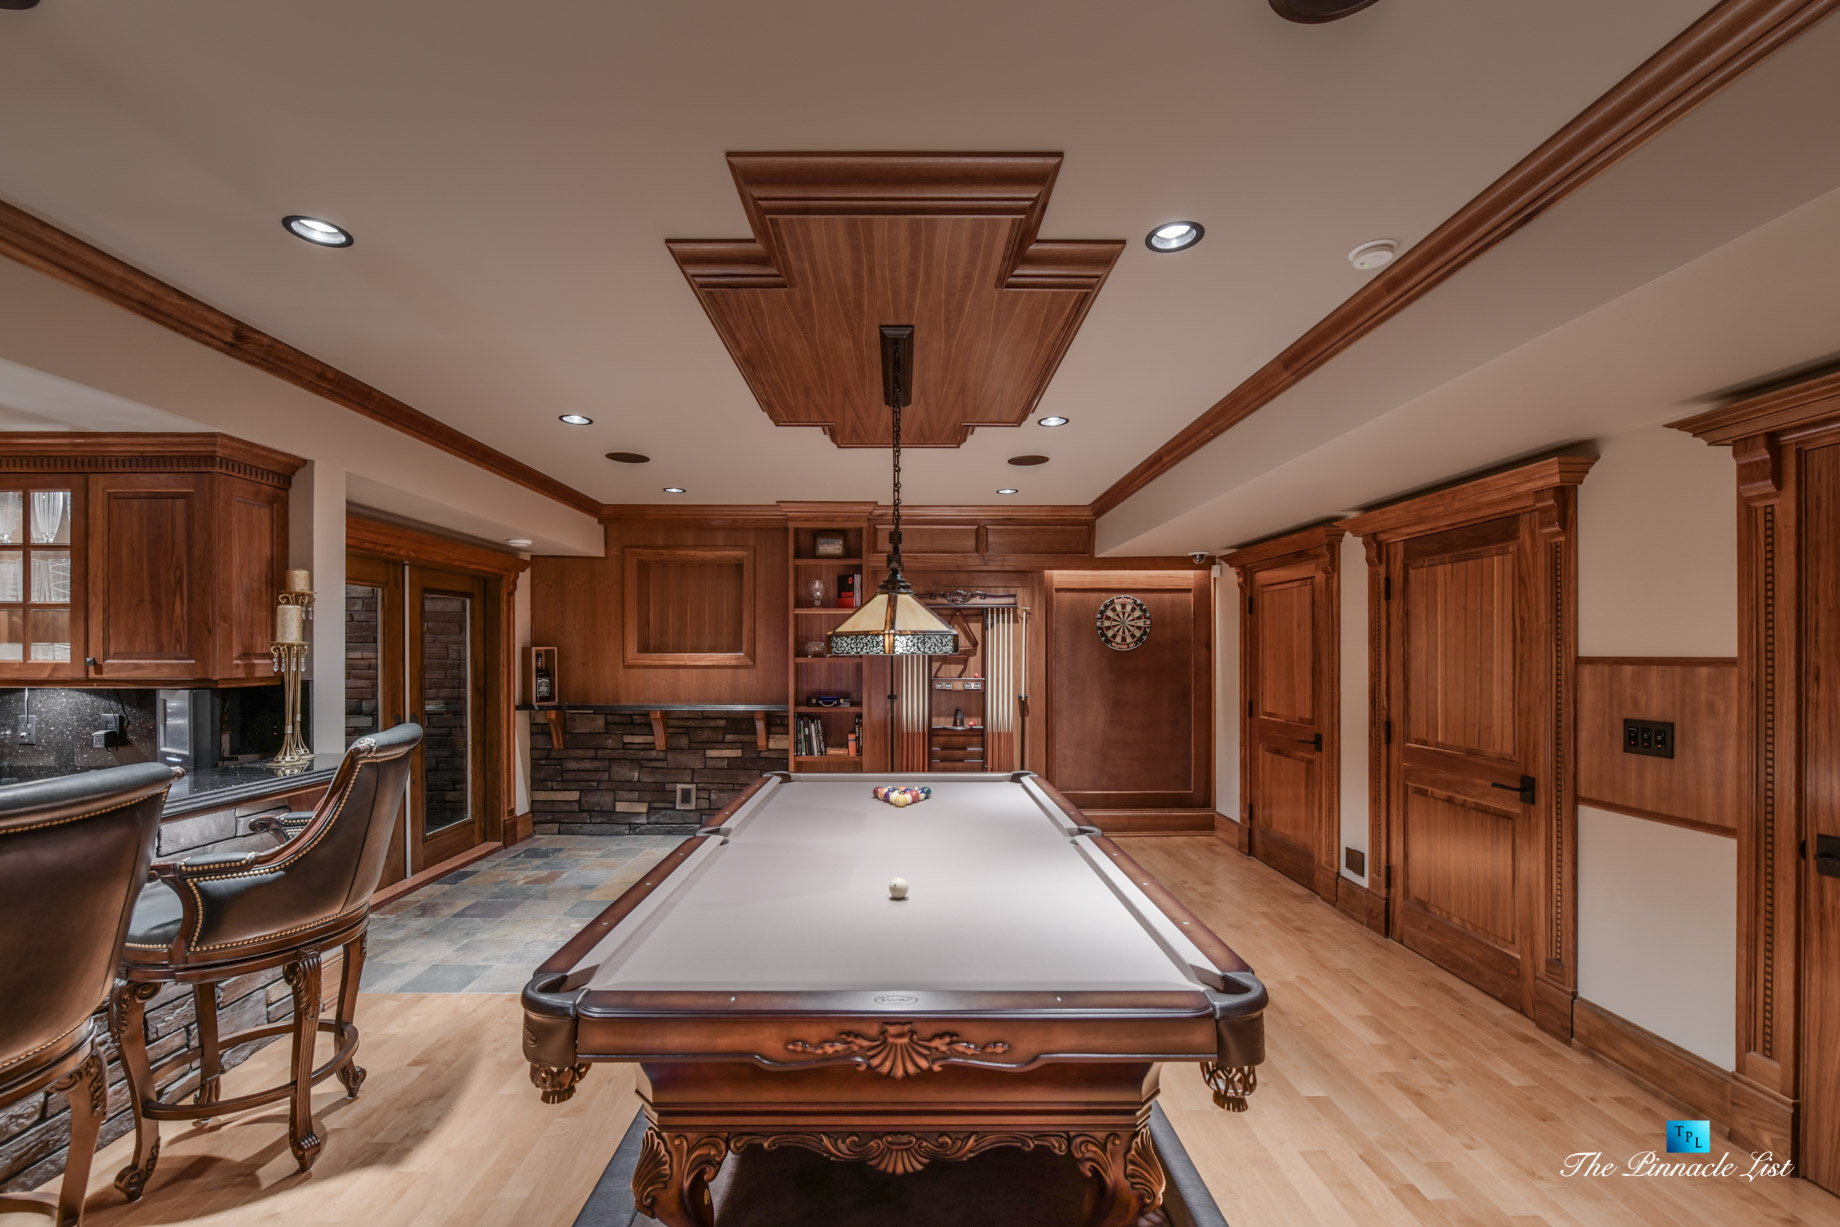 3053 Anmore Creek Way, Anmore, BC, Canada – Basement Man Cave Pool Table and Bar – Luxury Real Estate – Greater Vancouver Home